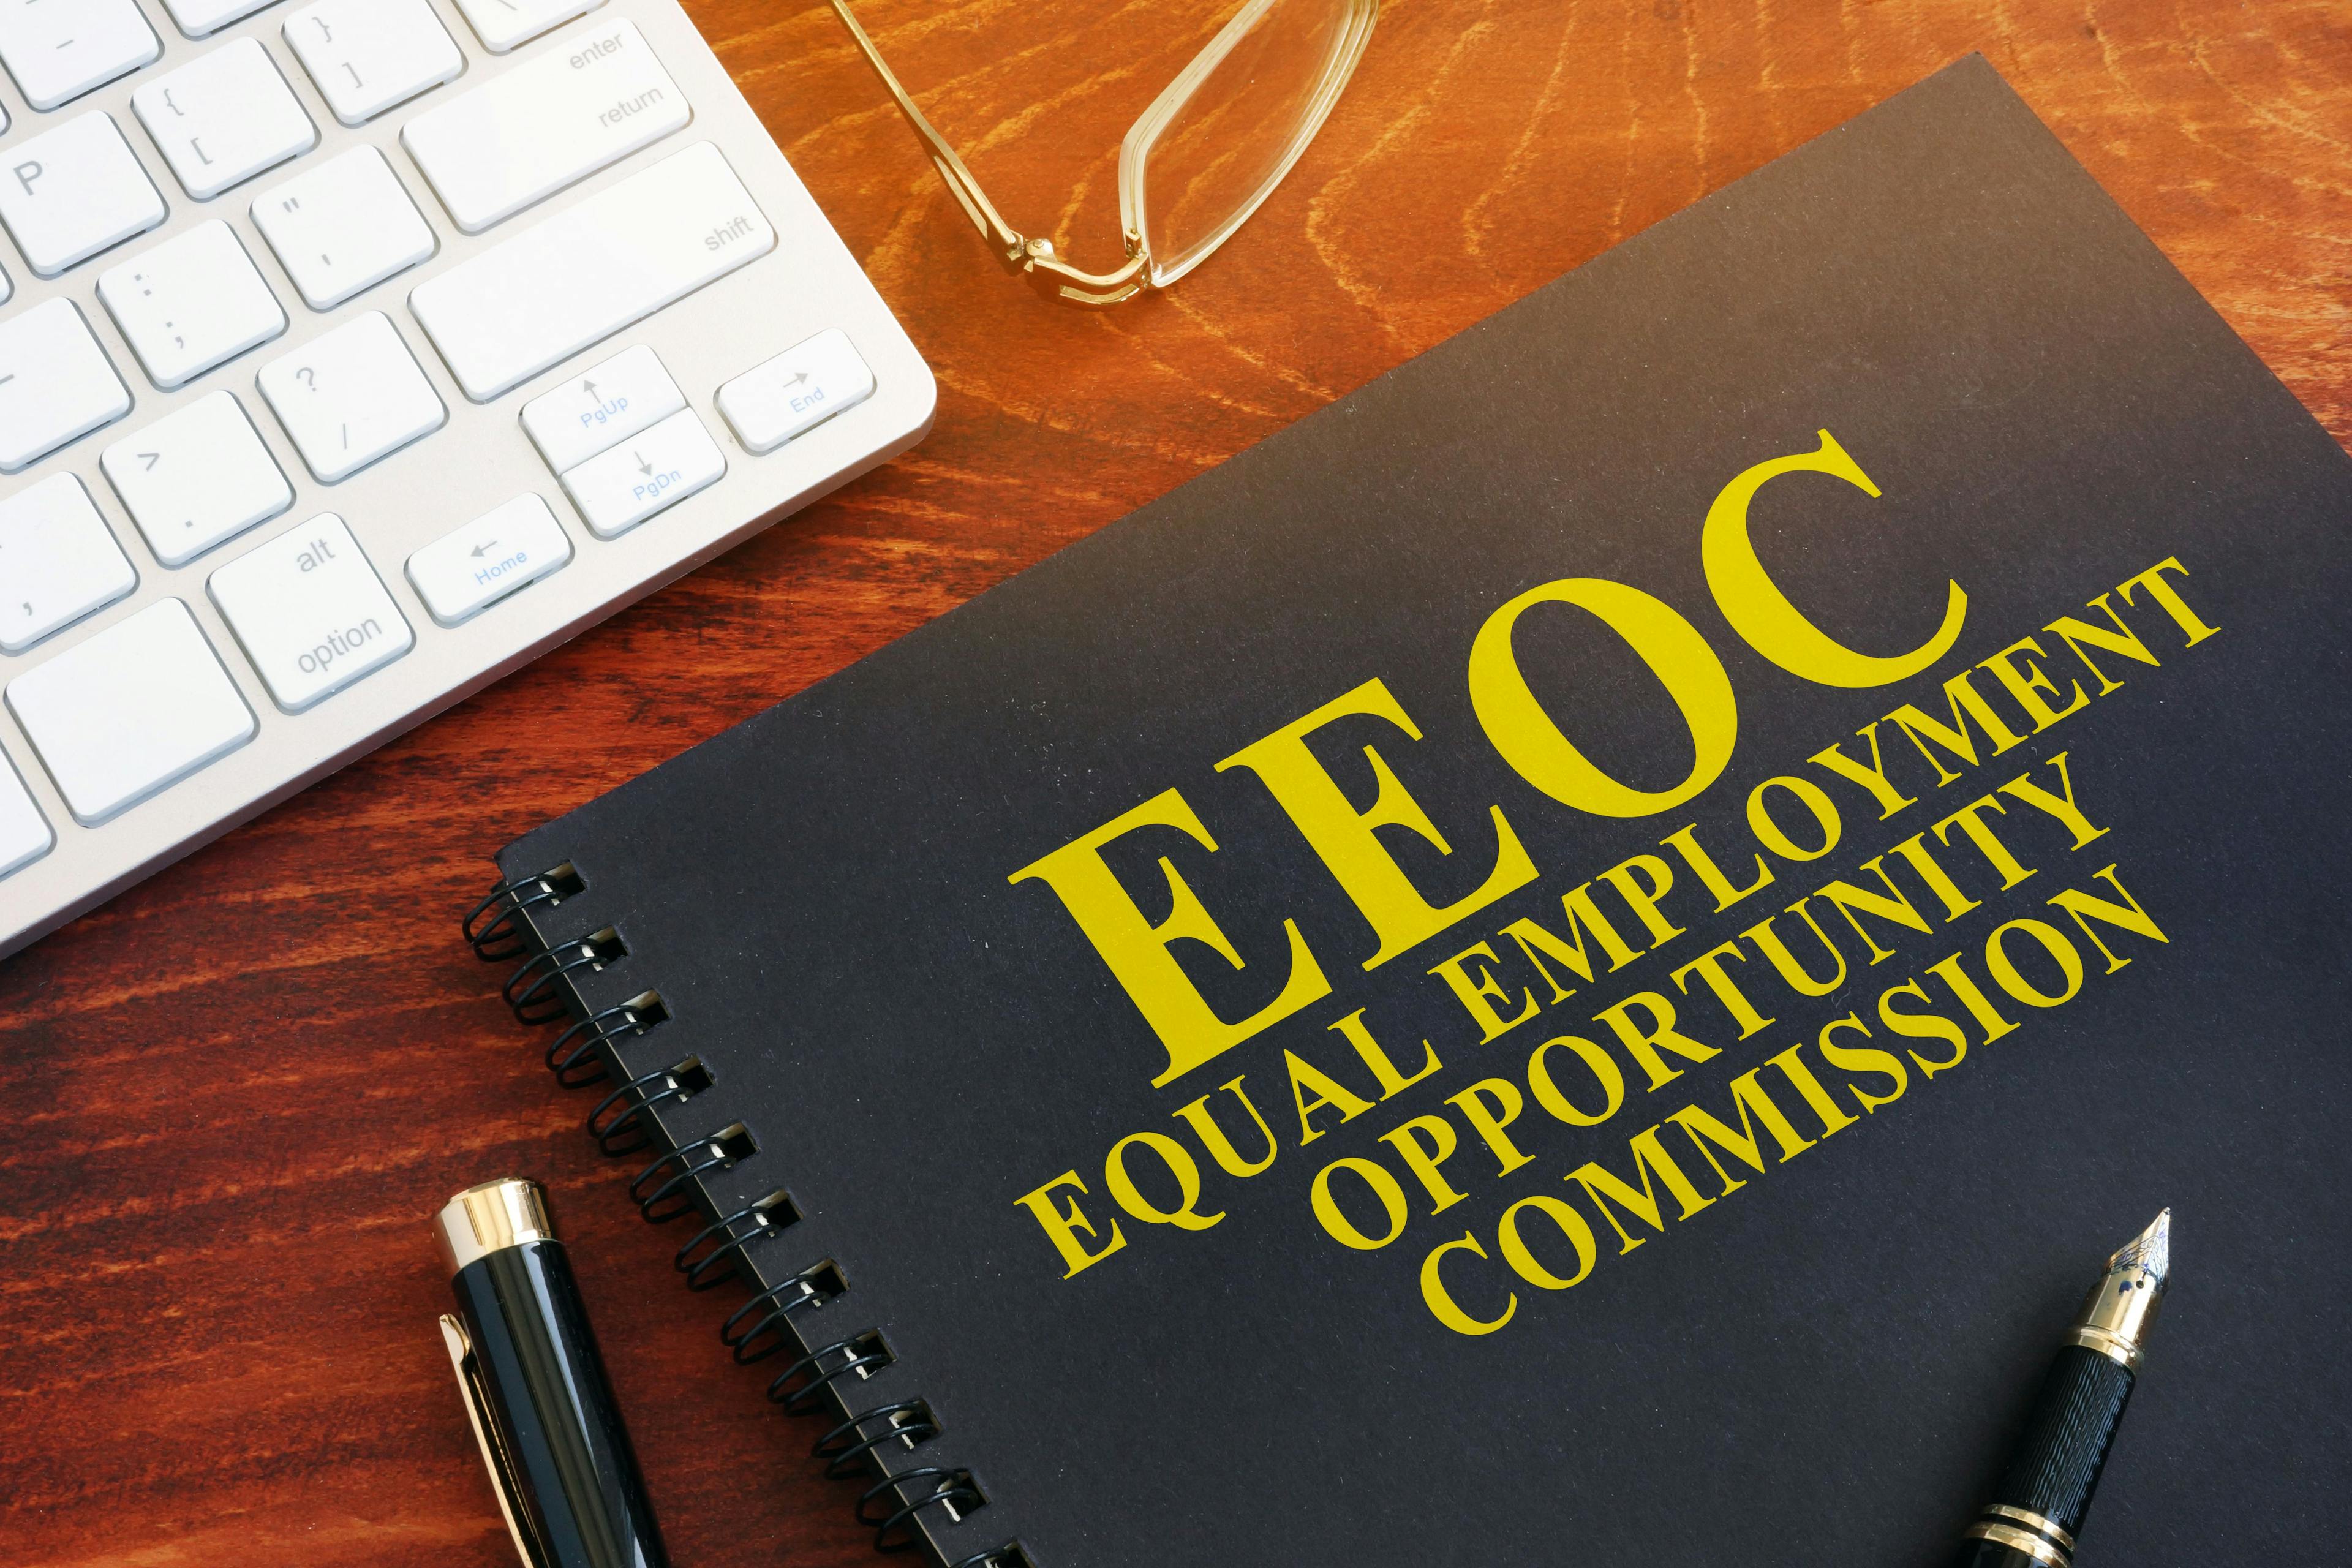 A black book with EEOC on the cover